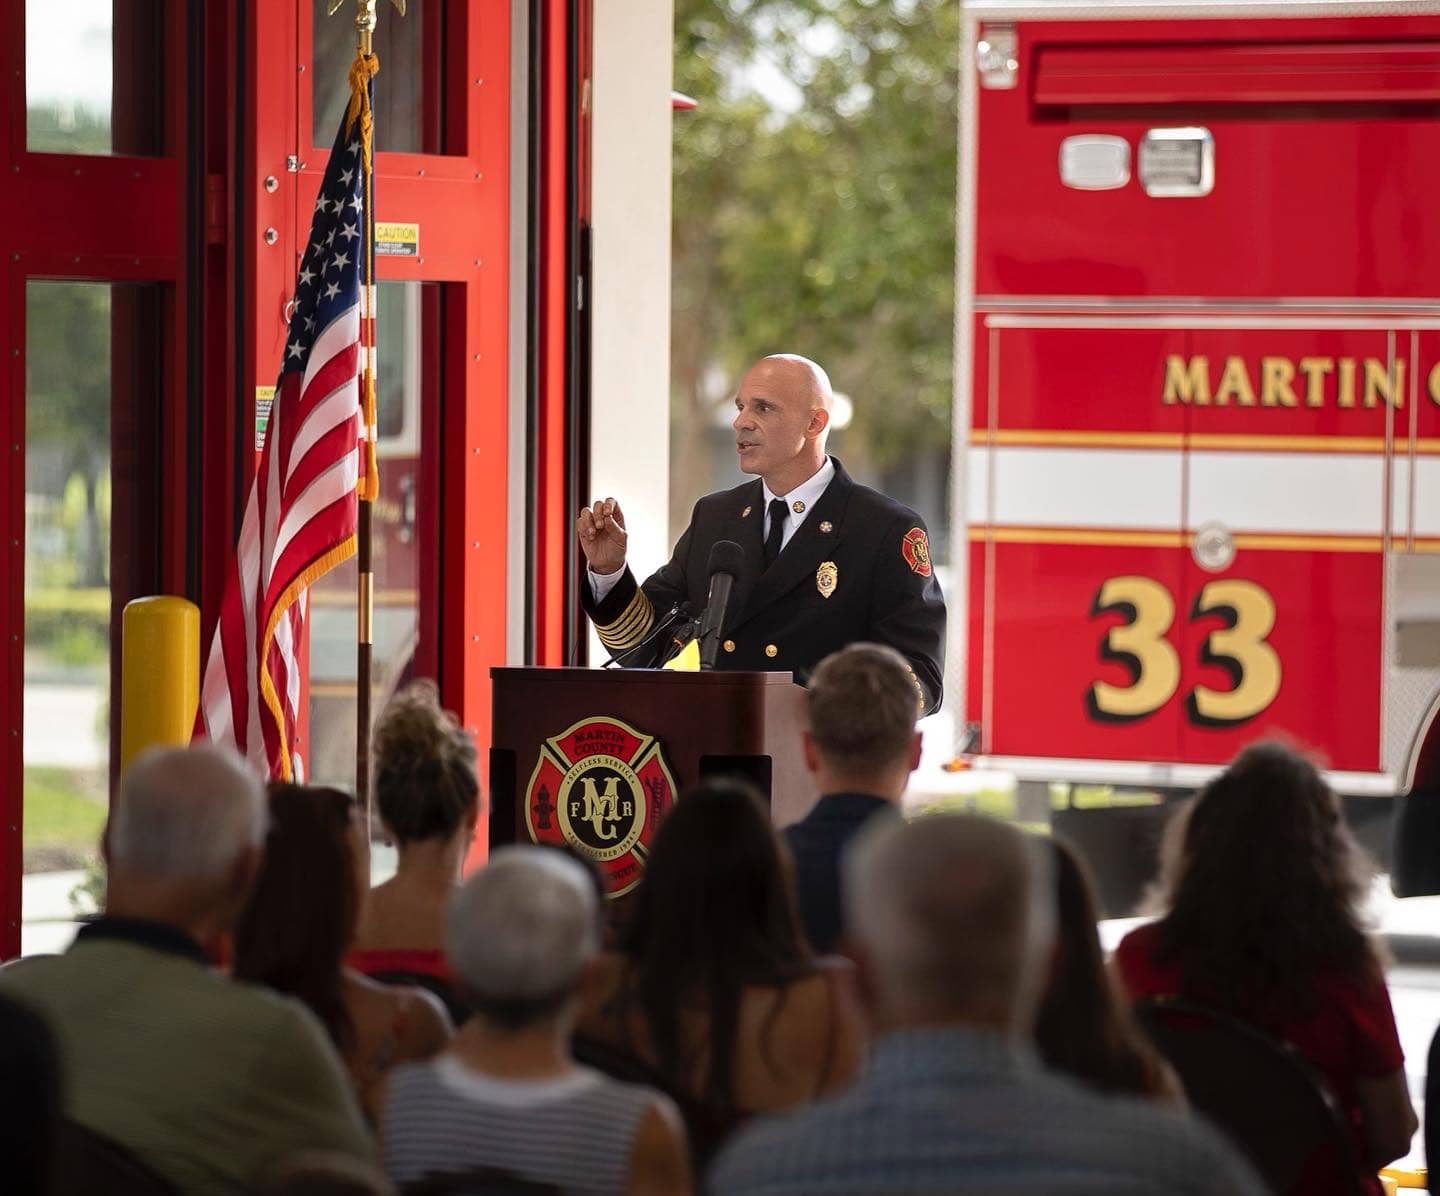 Fire Rescue staff speaking at an event